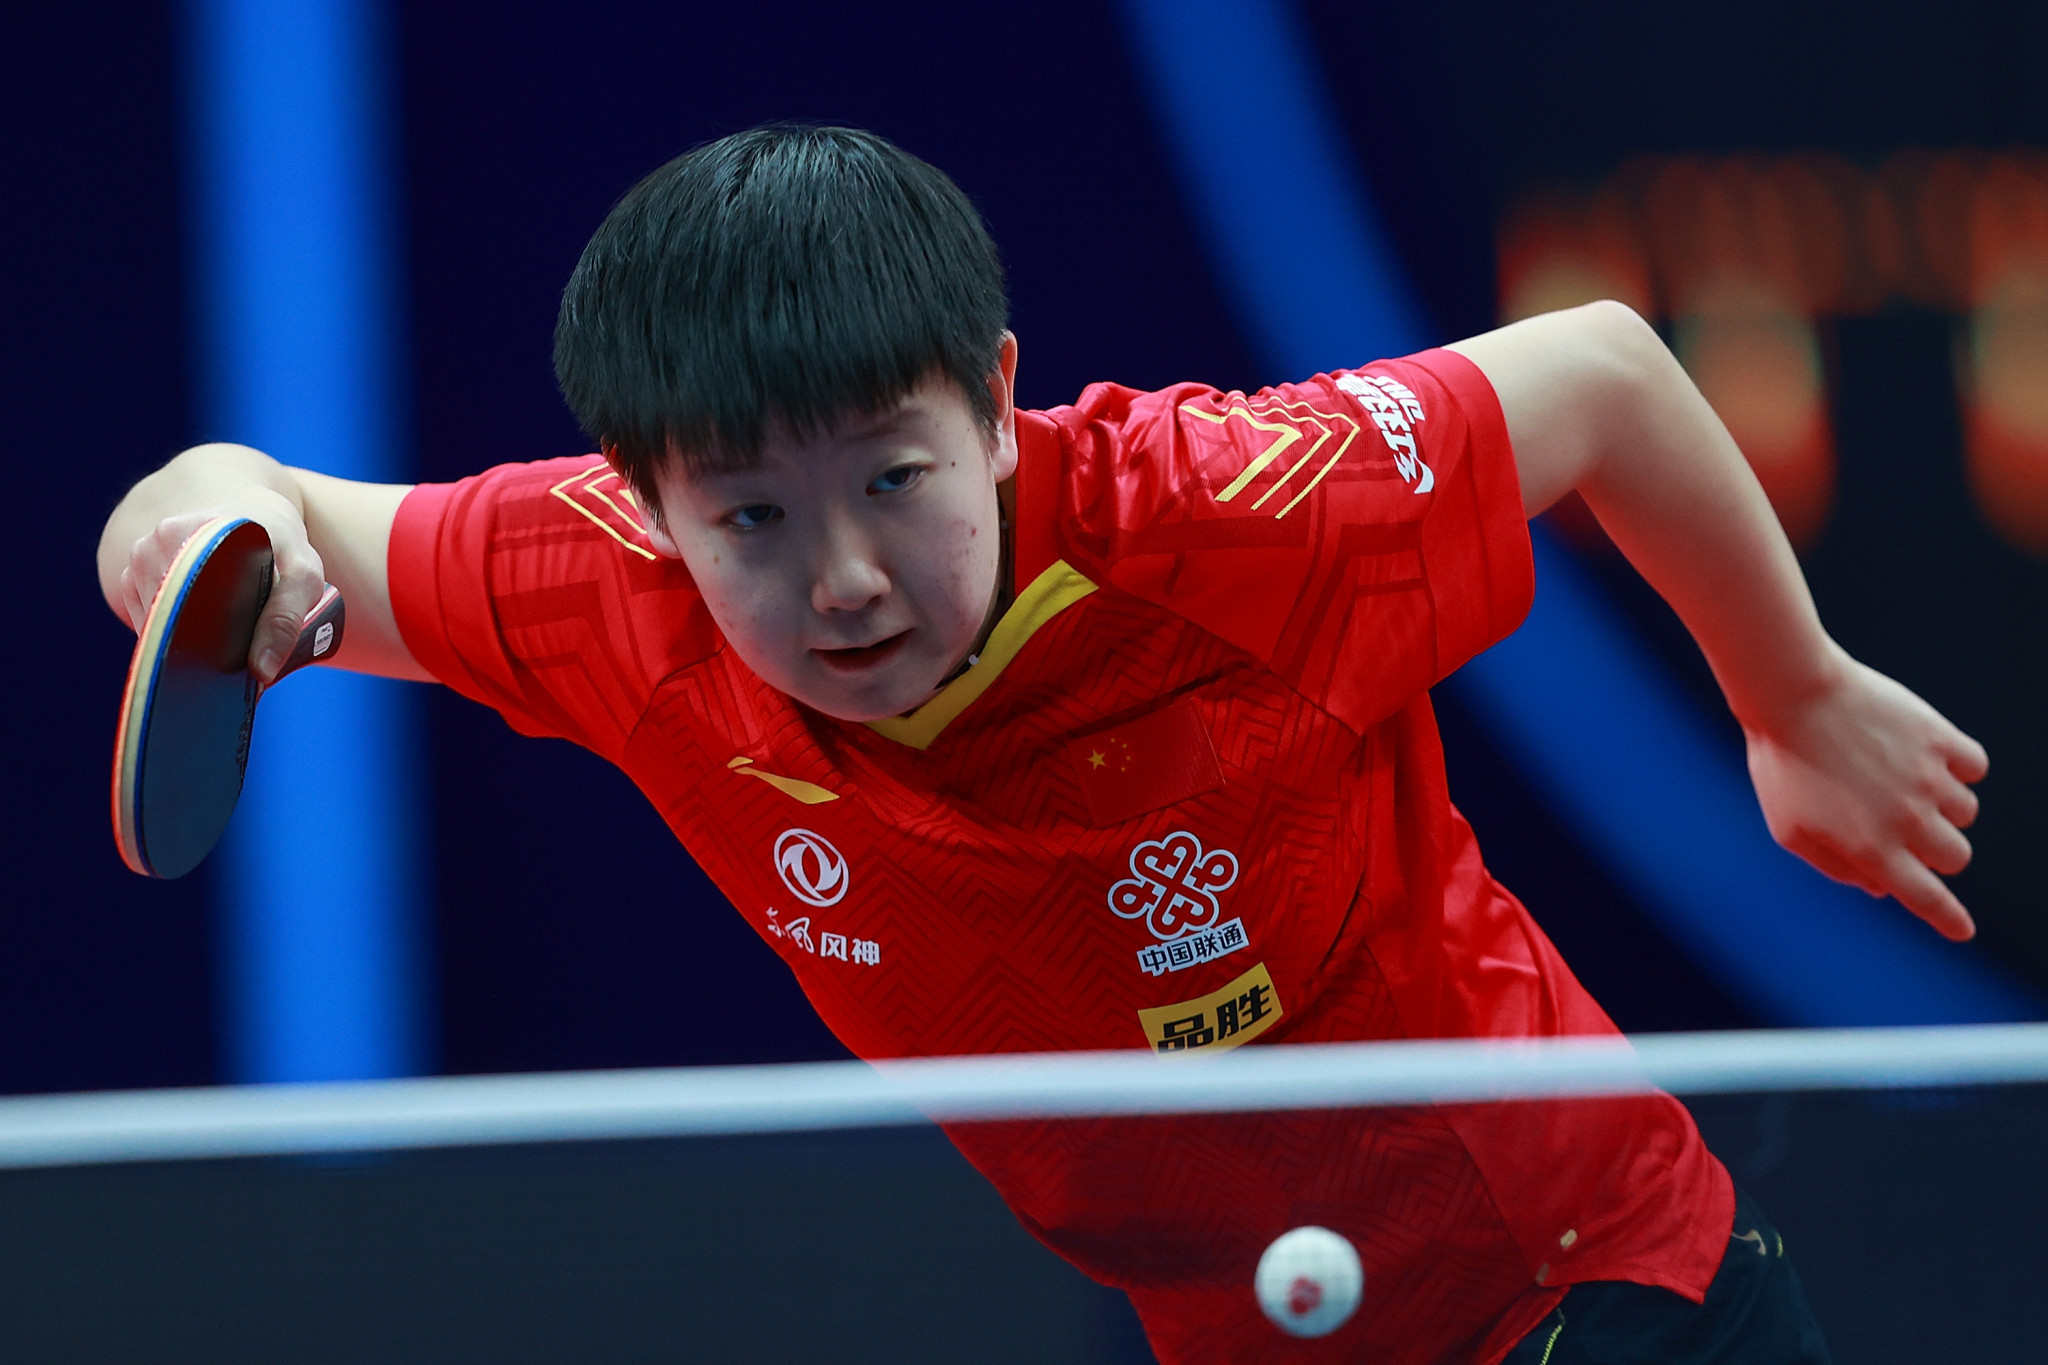 Sun Yingsha was the winner of the WTT promotional showcase in Macau last year ©Getty Images